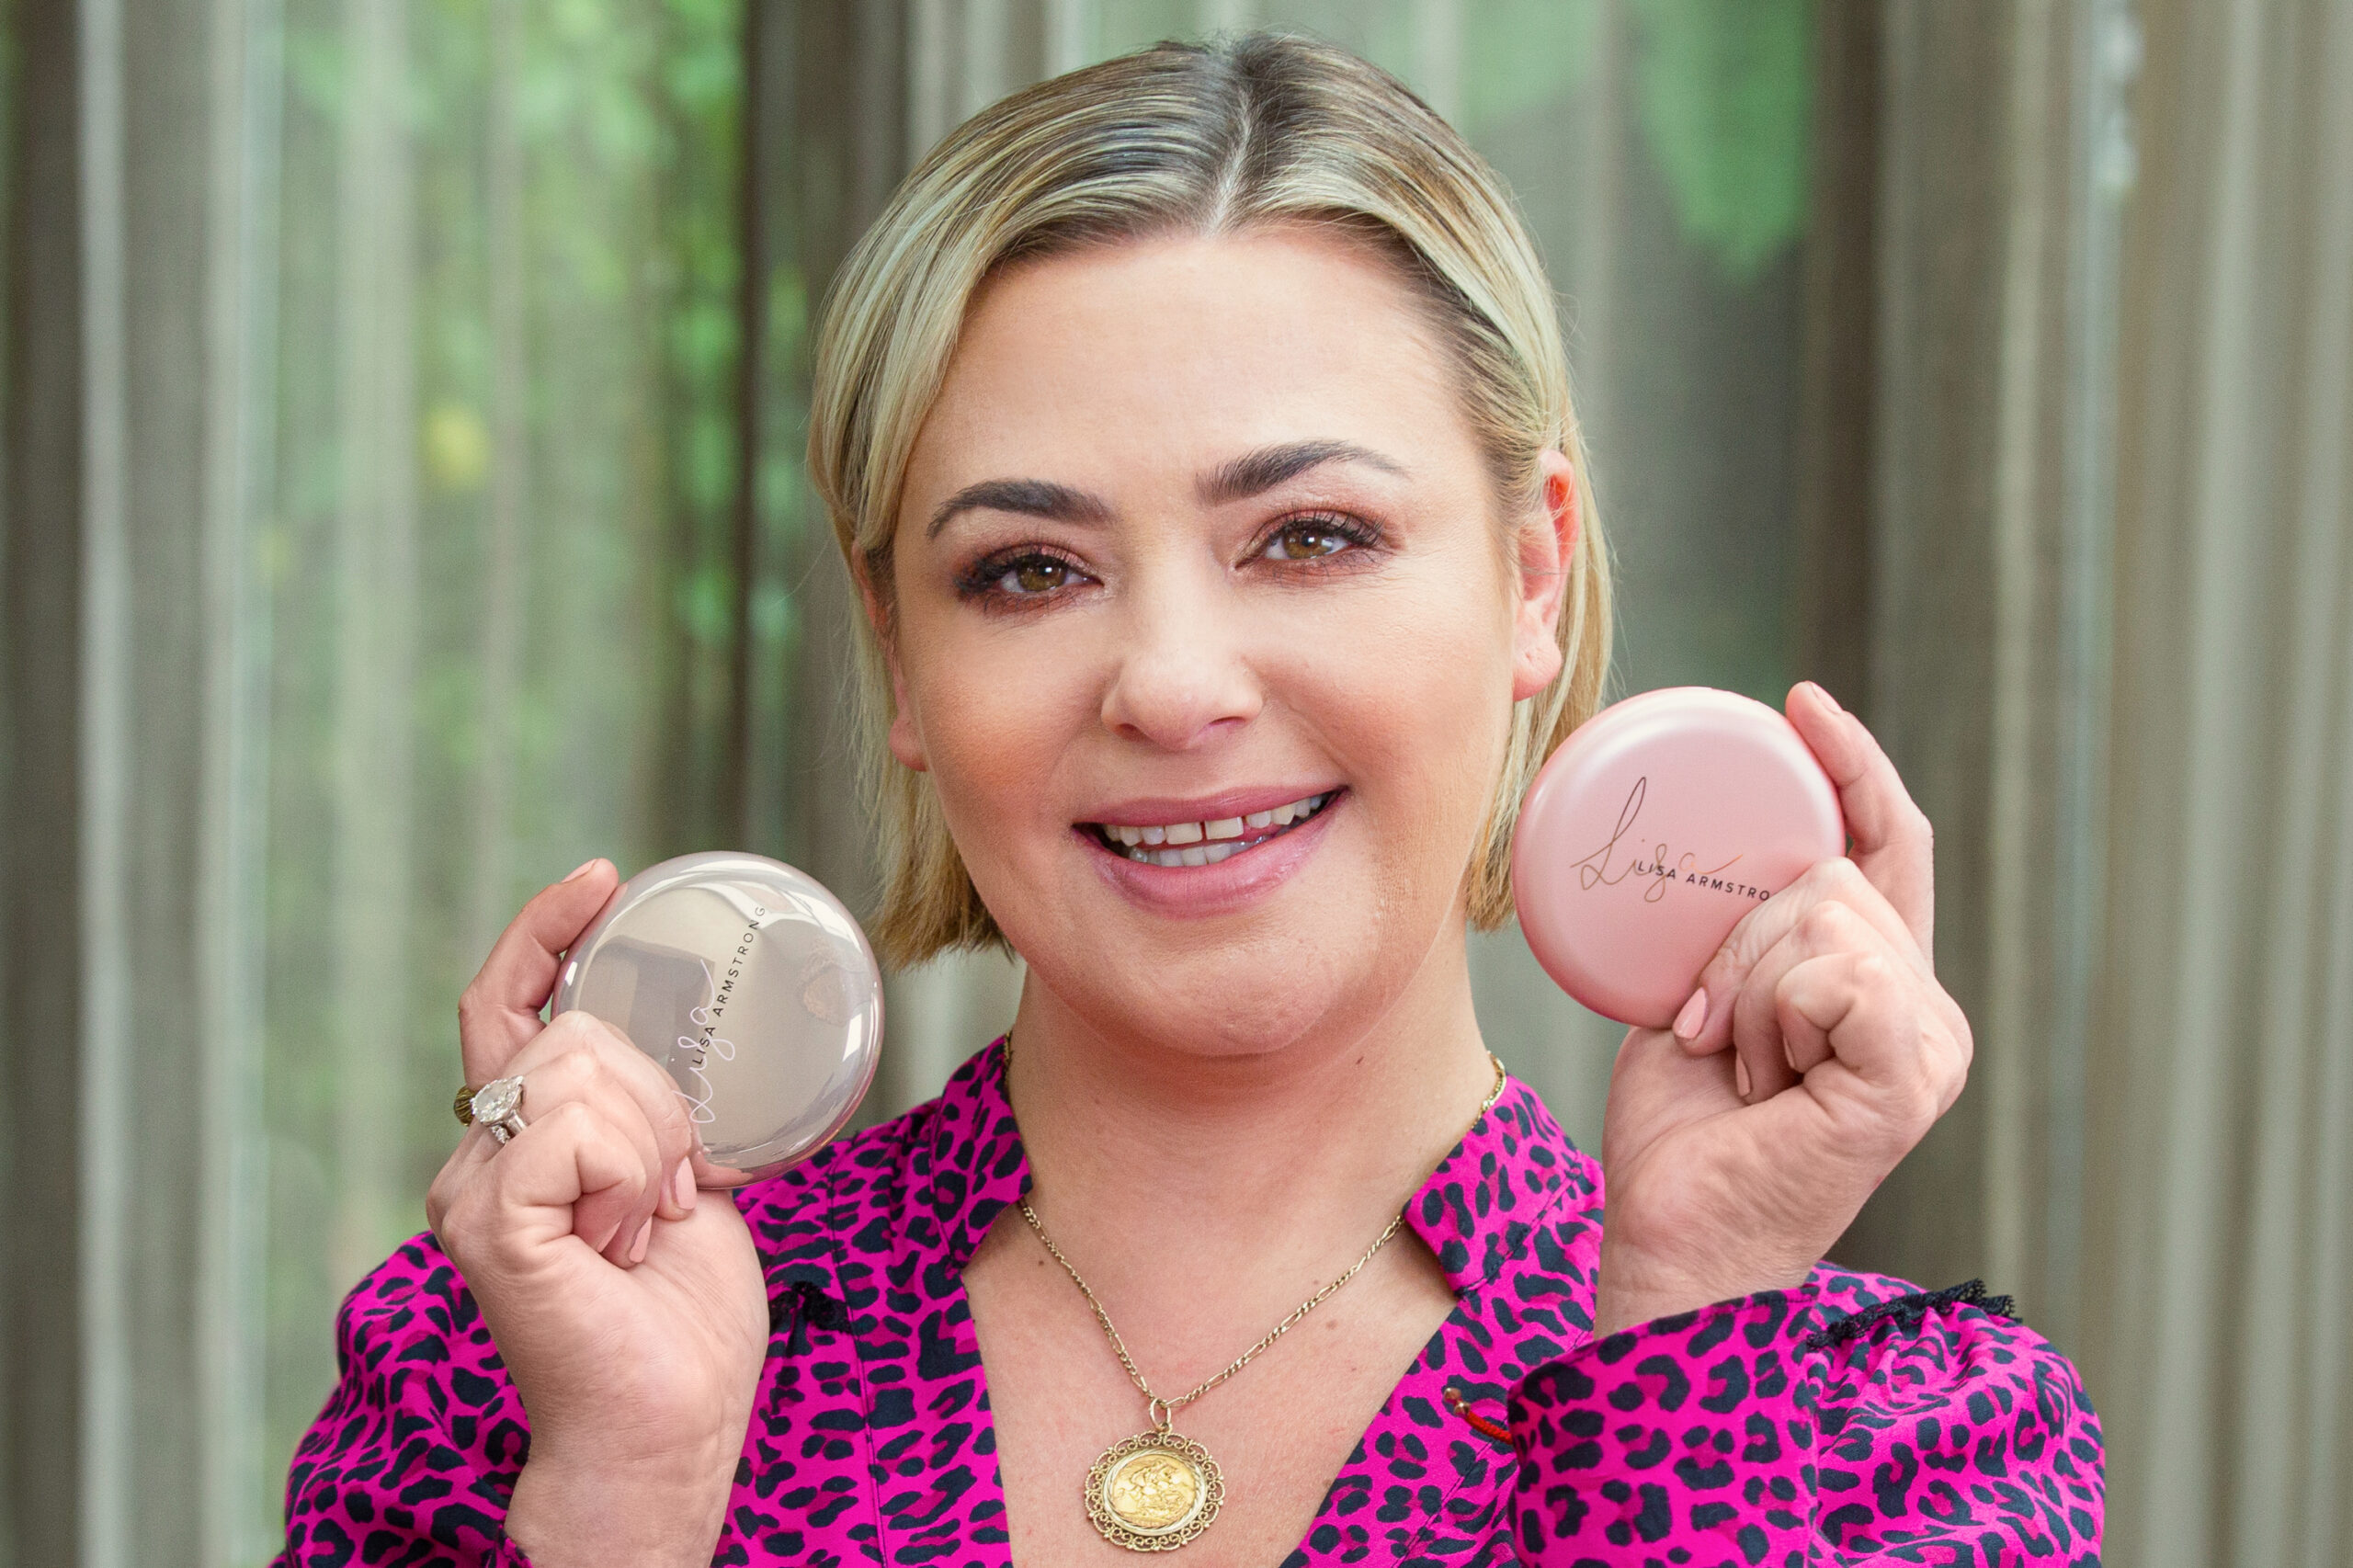 Avon Introduces Lisa Armstrong Make-up